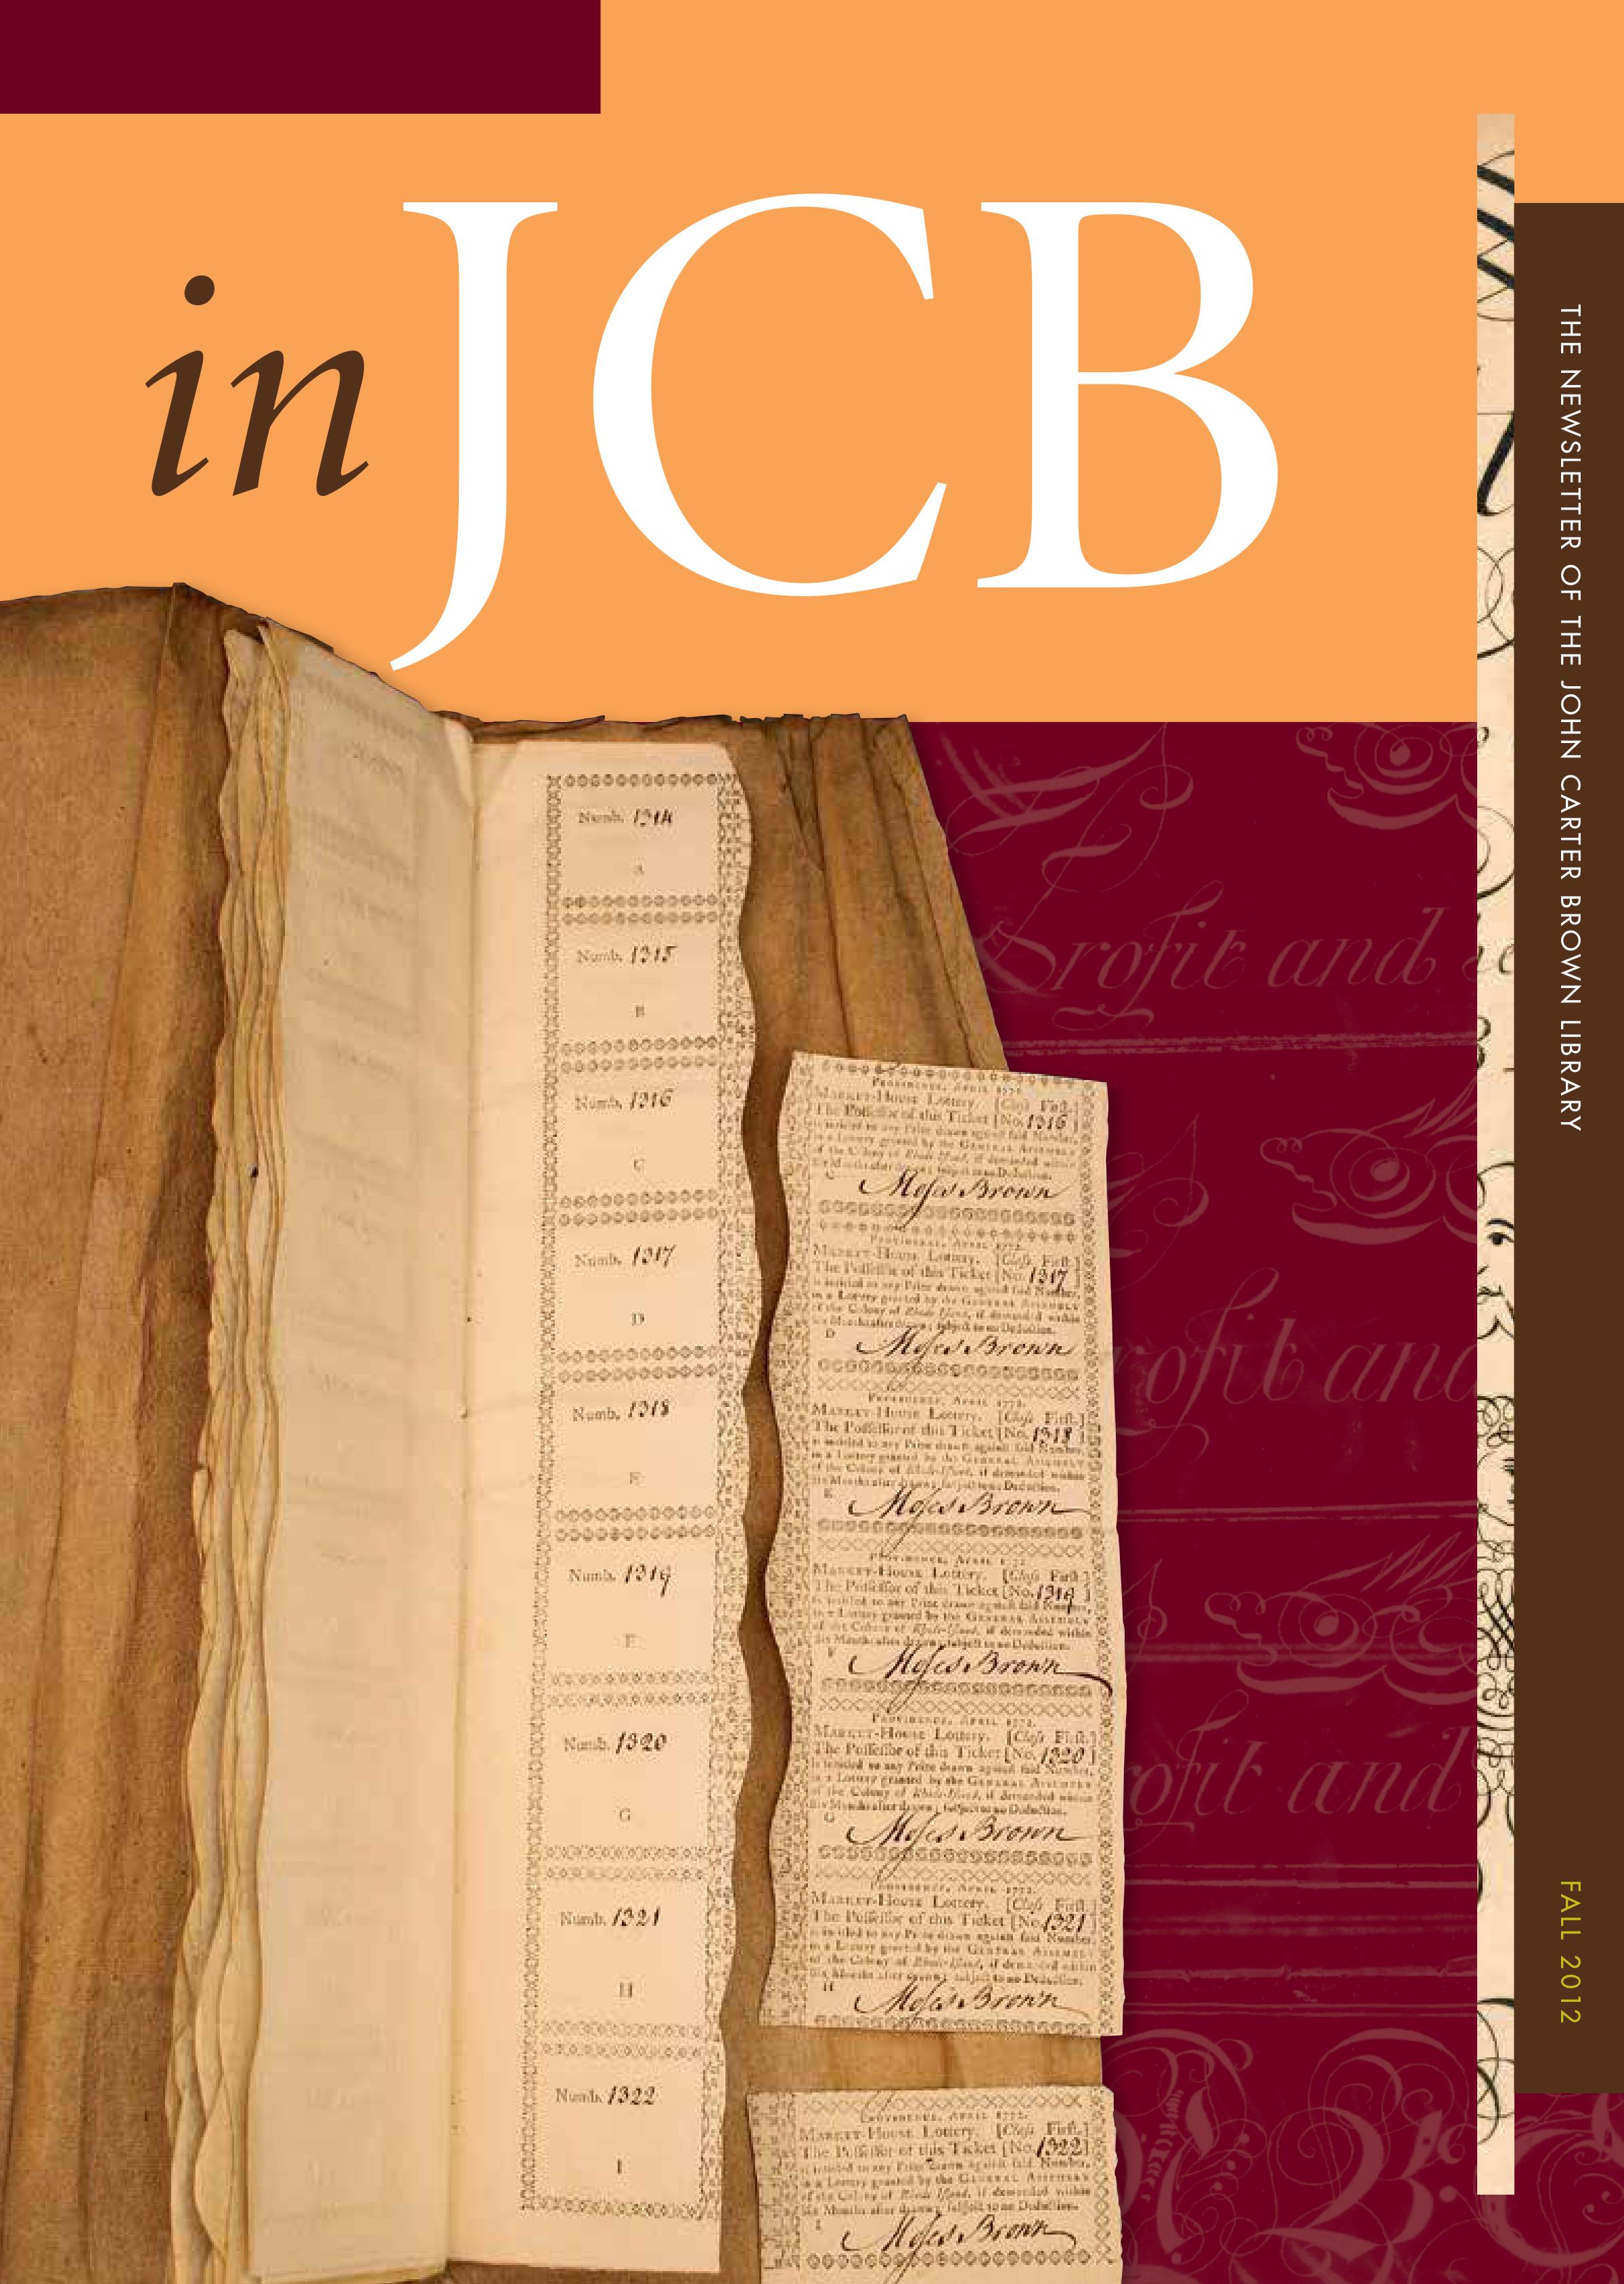 colorful cover of the In JCB newsletter, showing an image of an eighteenth century ticket book and tickets